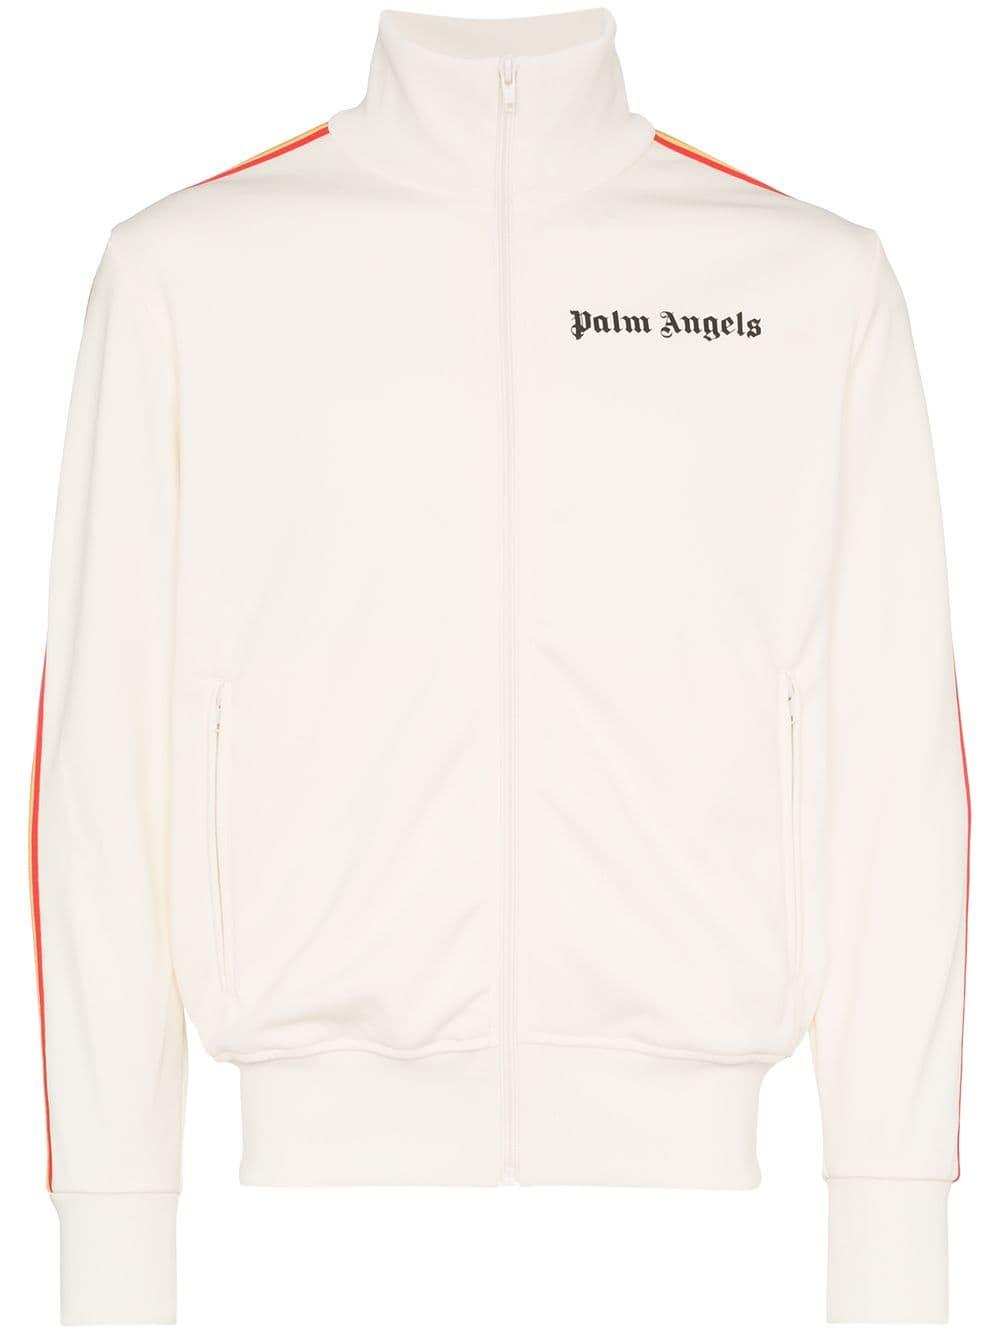 Palm Angels Rainbow Stripe Tracksuit Jacket in White for Men